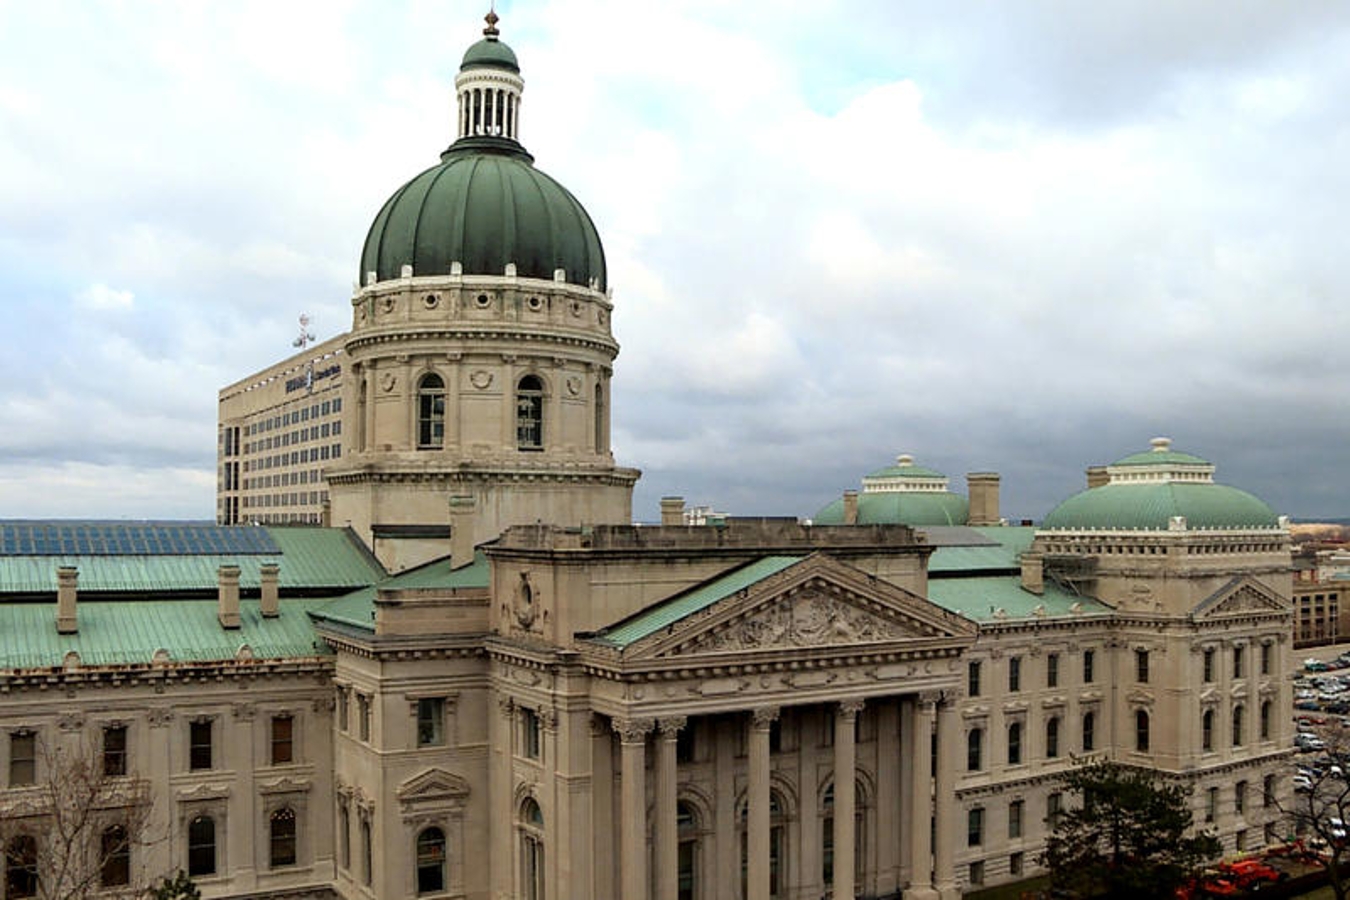 An exterior view of the Indiana Statehouse in Indianapolis.